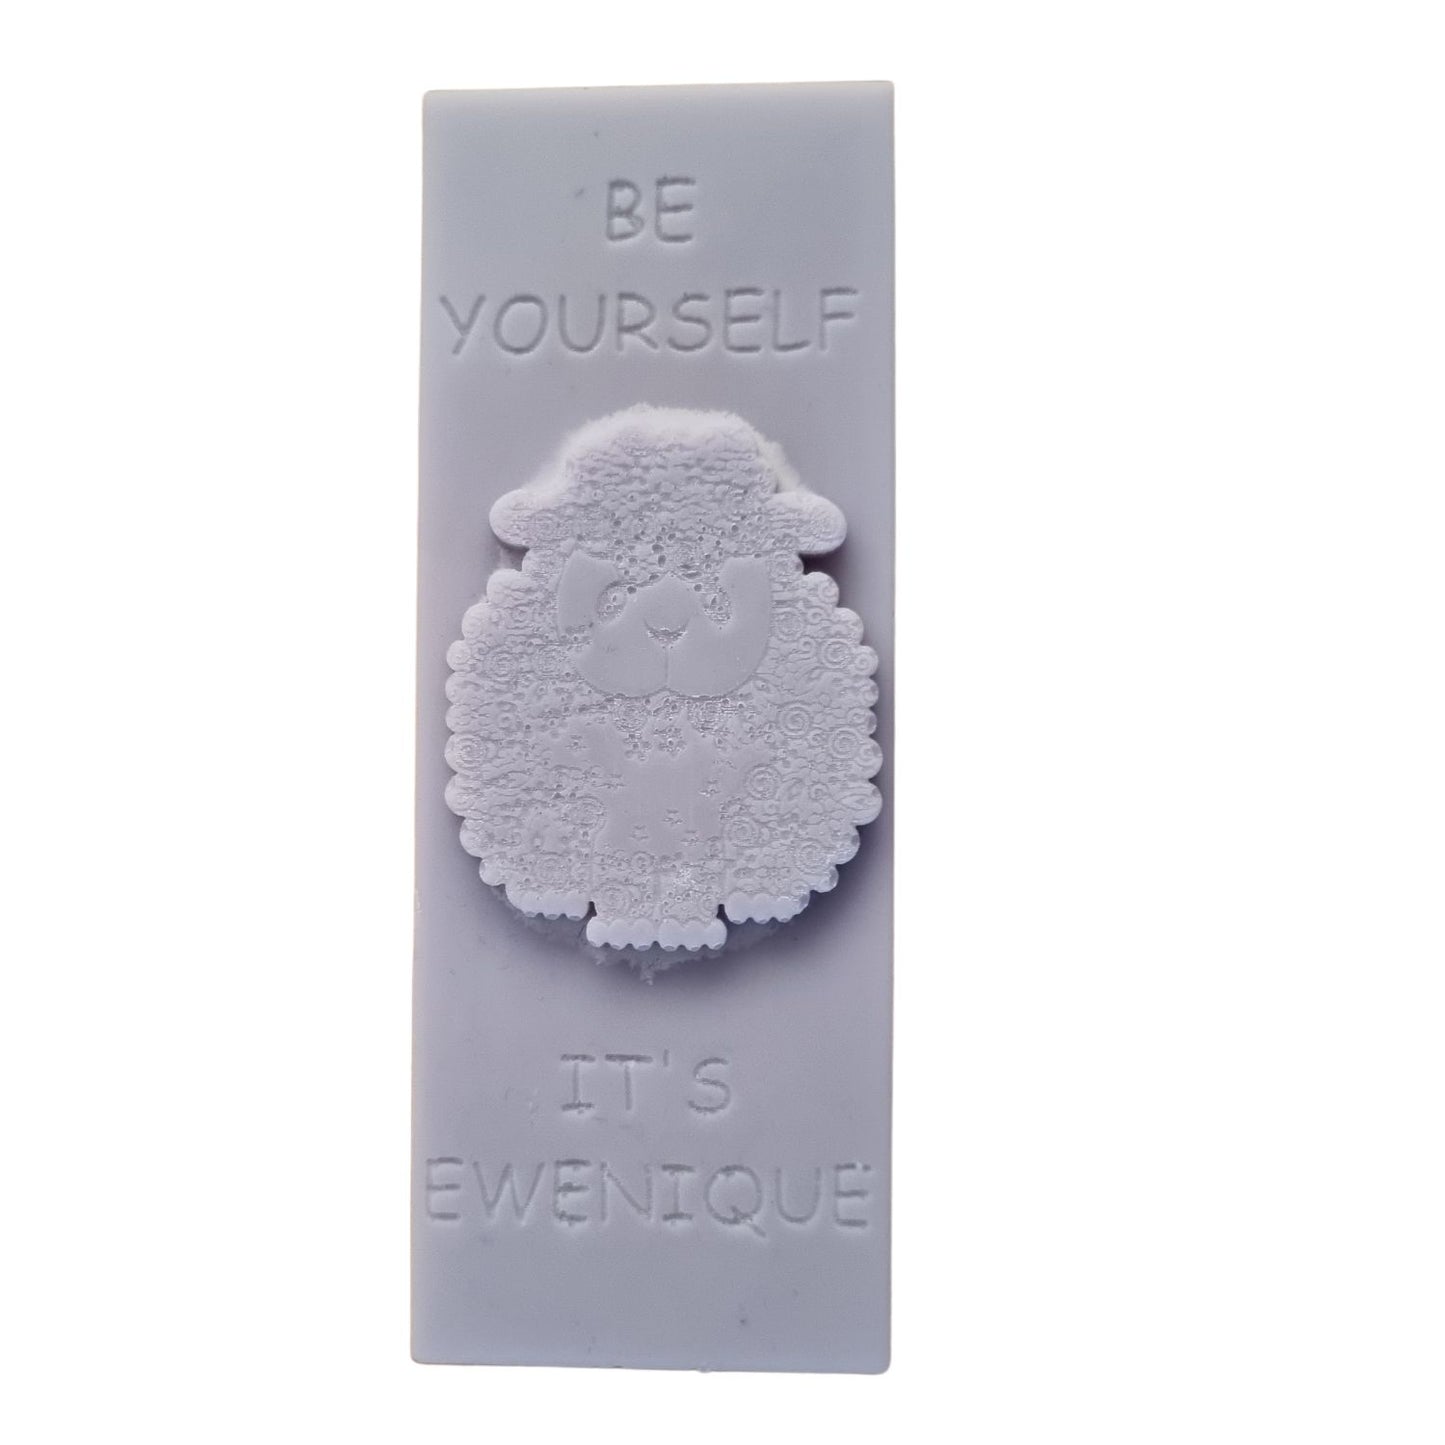 A lilac coloured wax melt bar with a raised sheep design with the writing be yourself above and it's ewenique below.